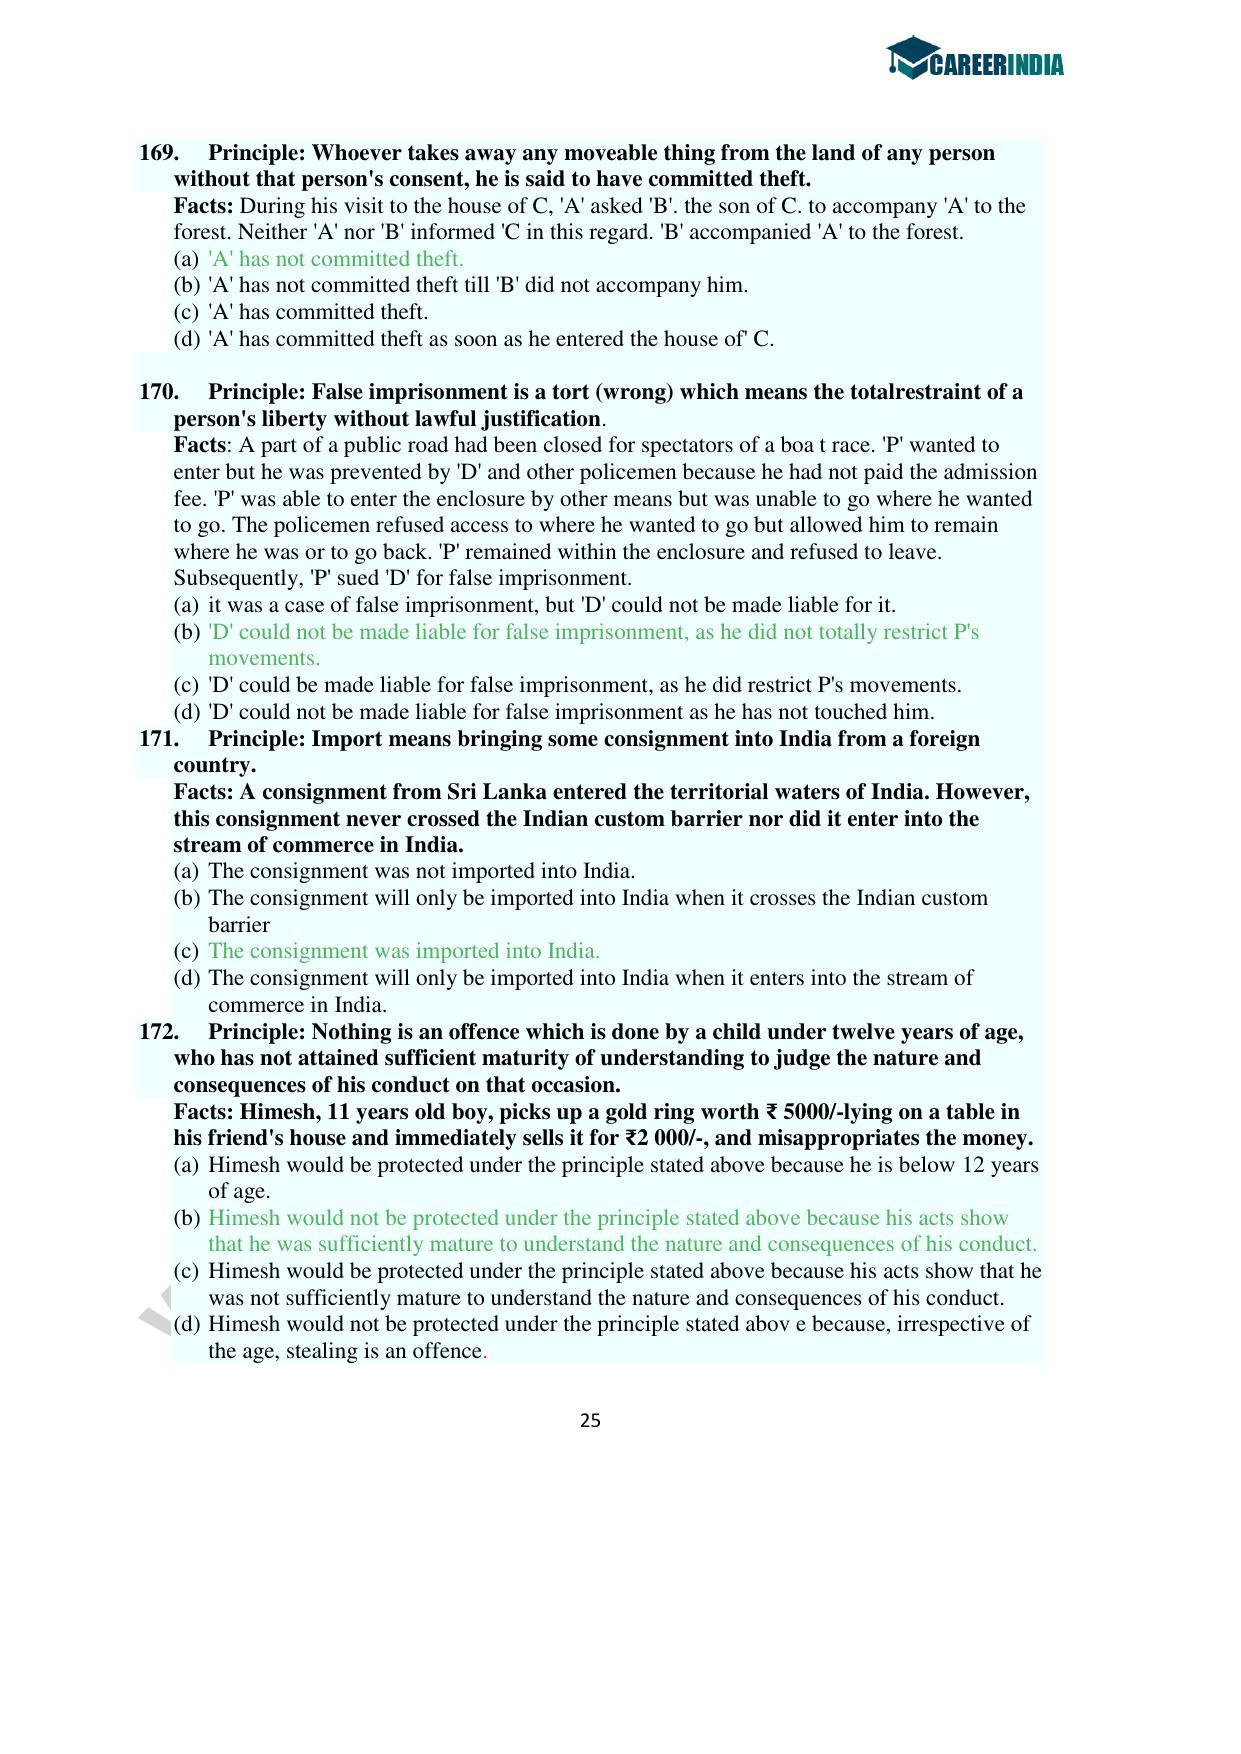 CLAT 2016 UG Question Paper with Answer Key - Page 25